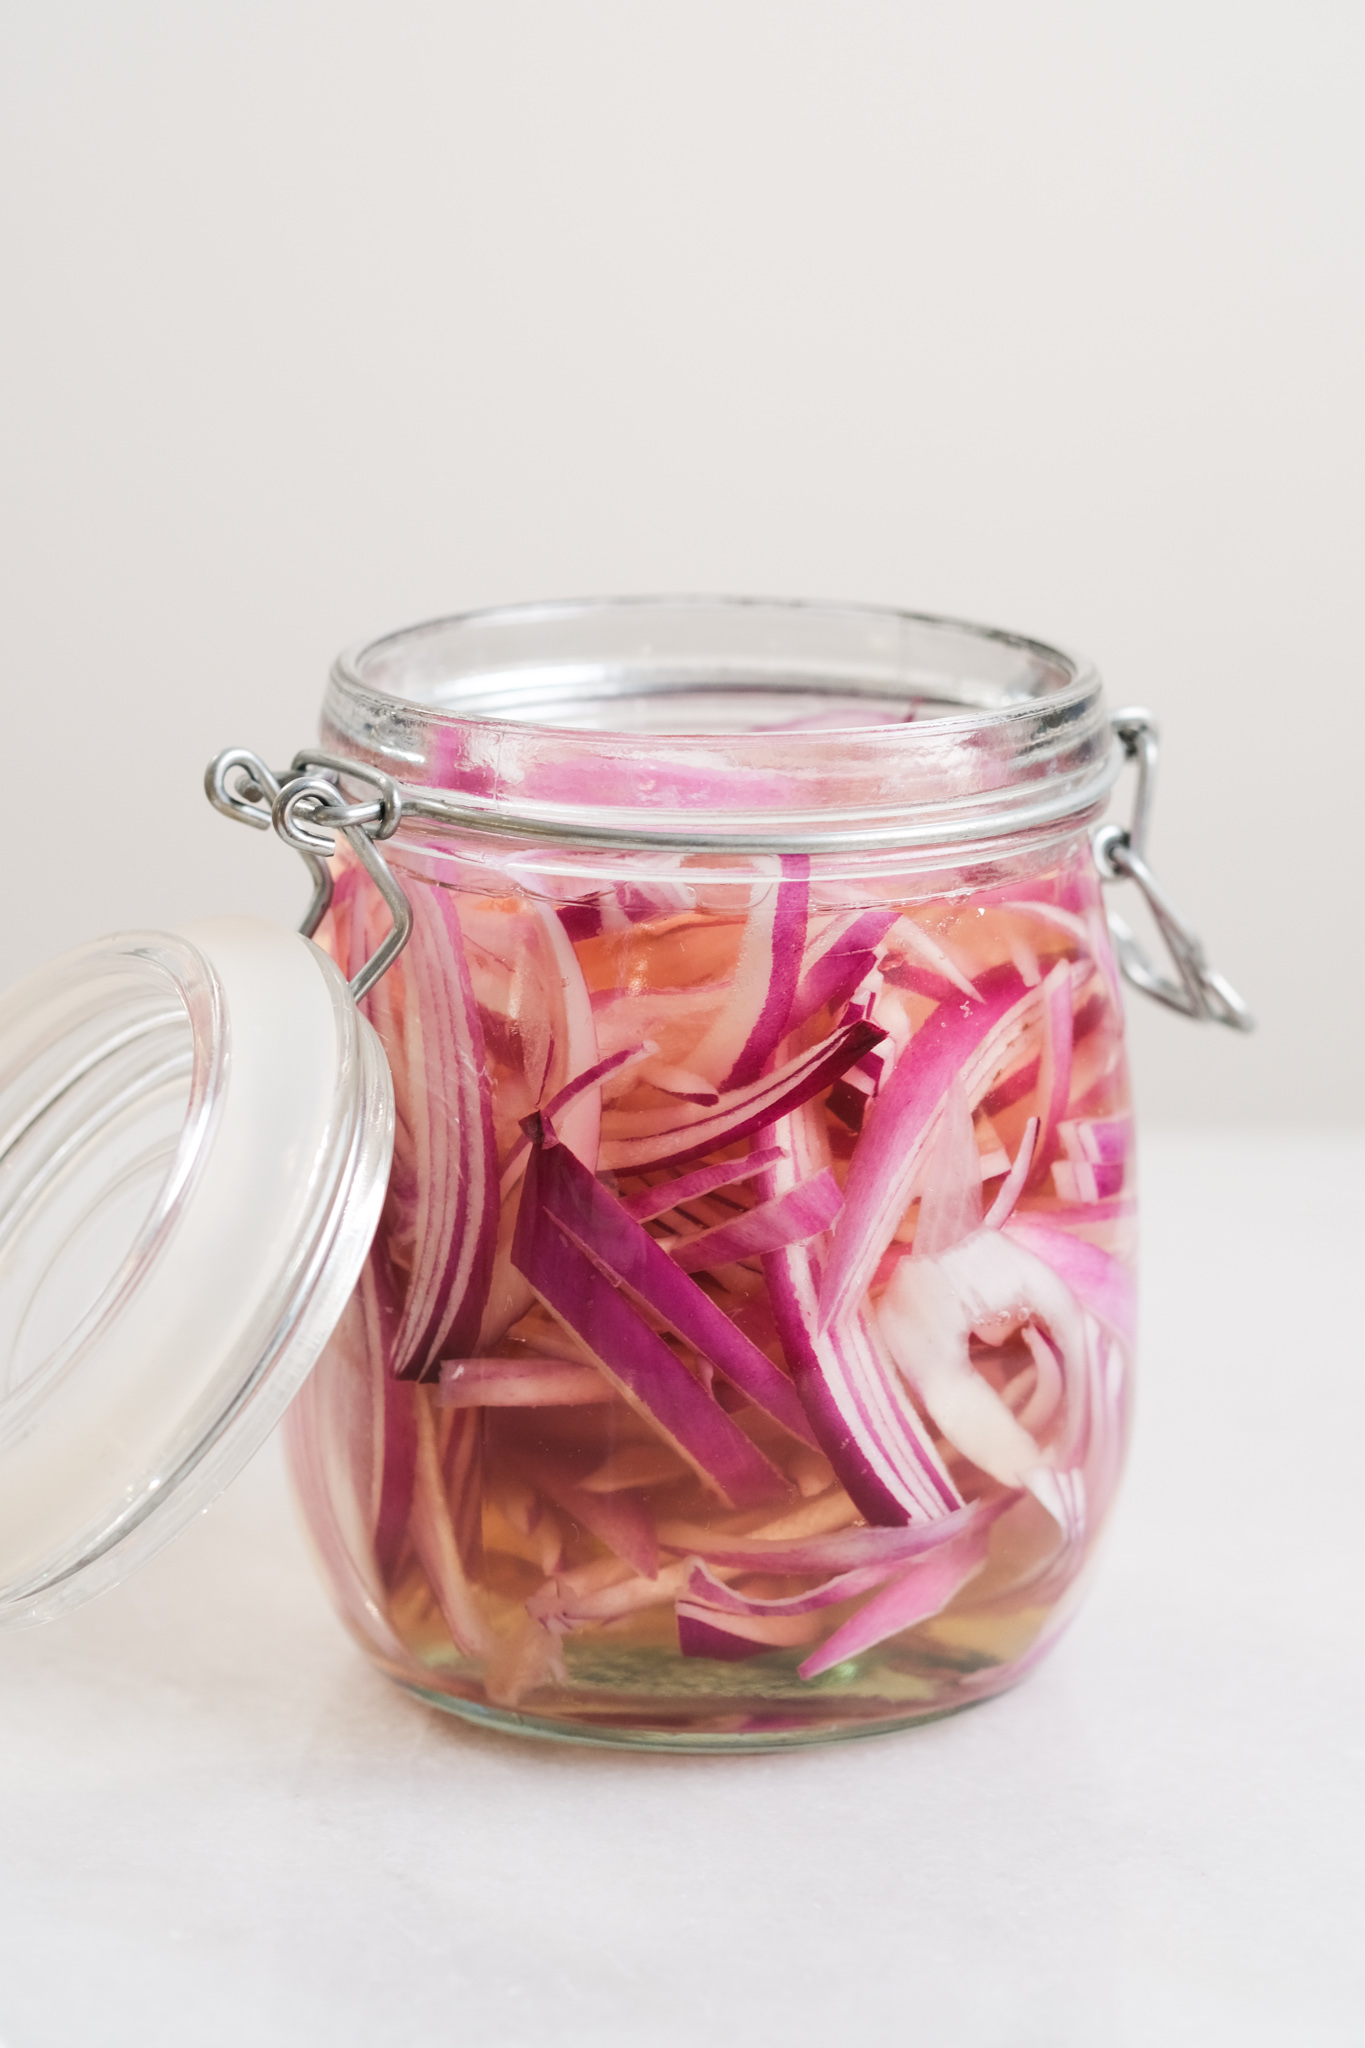 red onions after vinegar base has been poured into a jar for pickling